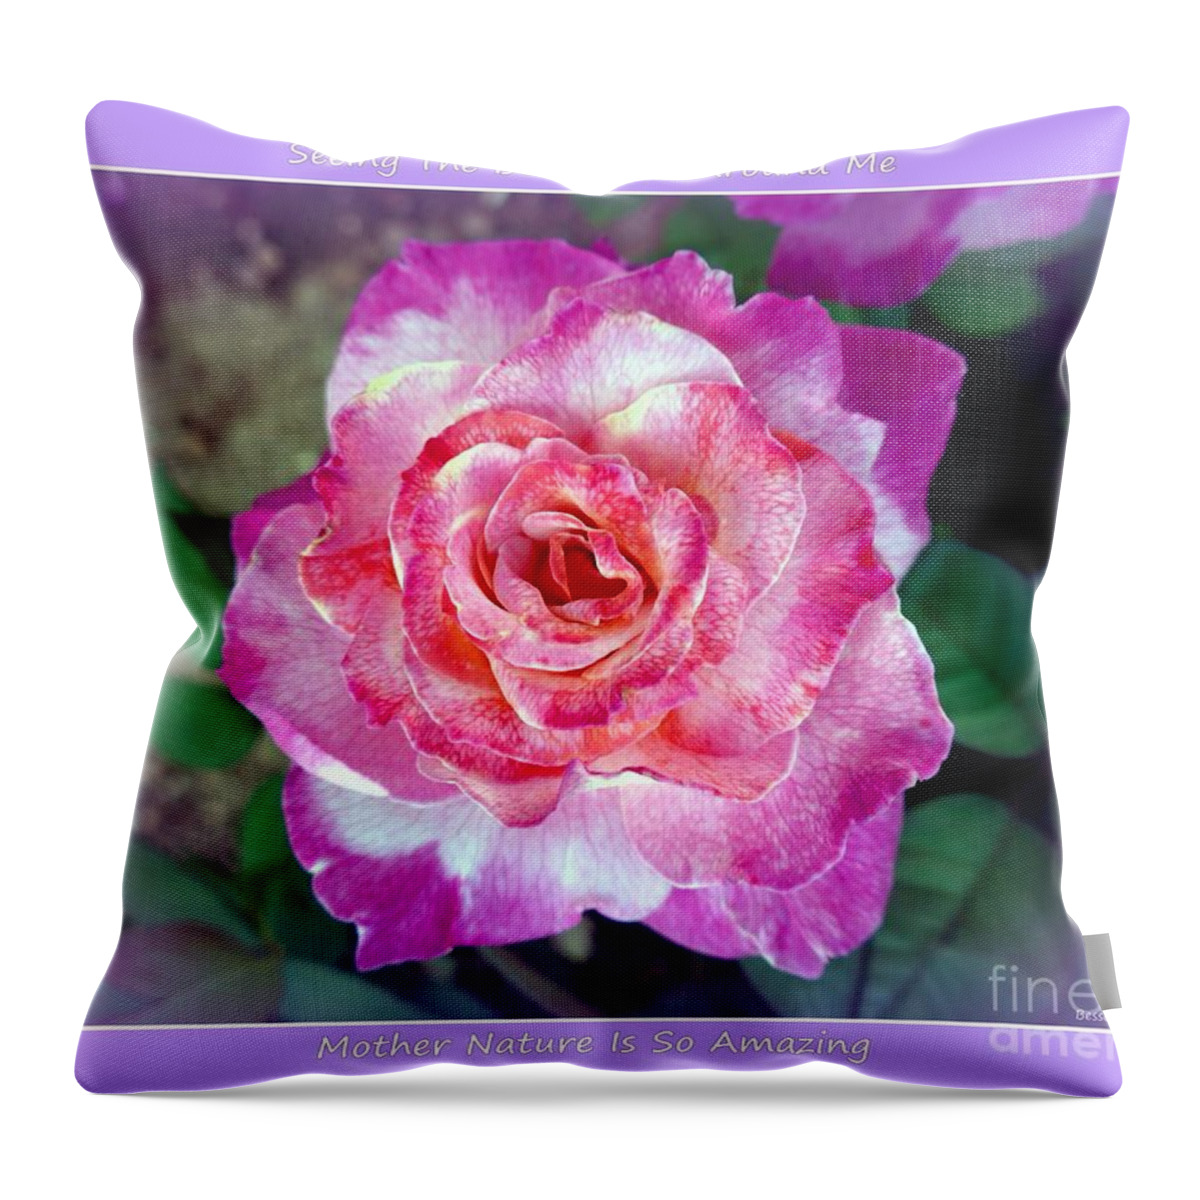 Rose Heart Throw Pillow featuring the photograph Dusty Rose Heart by Mars Besso